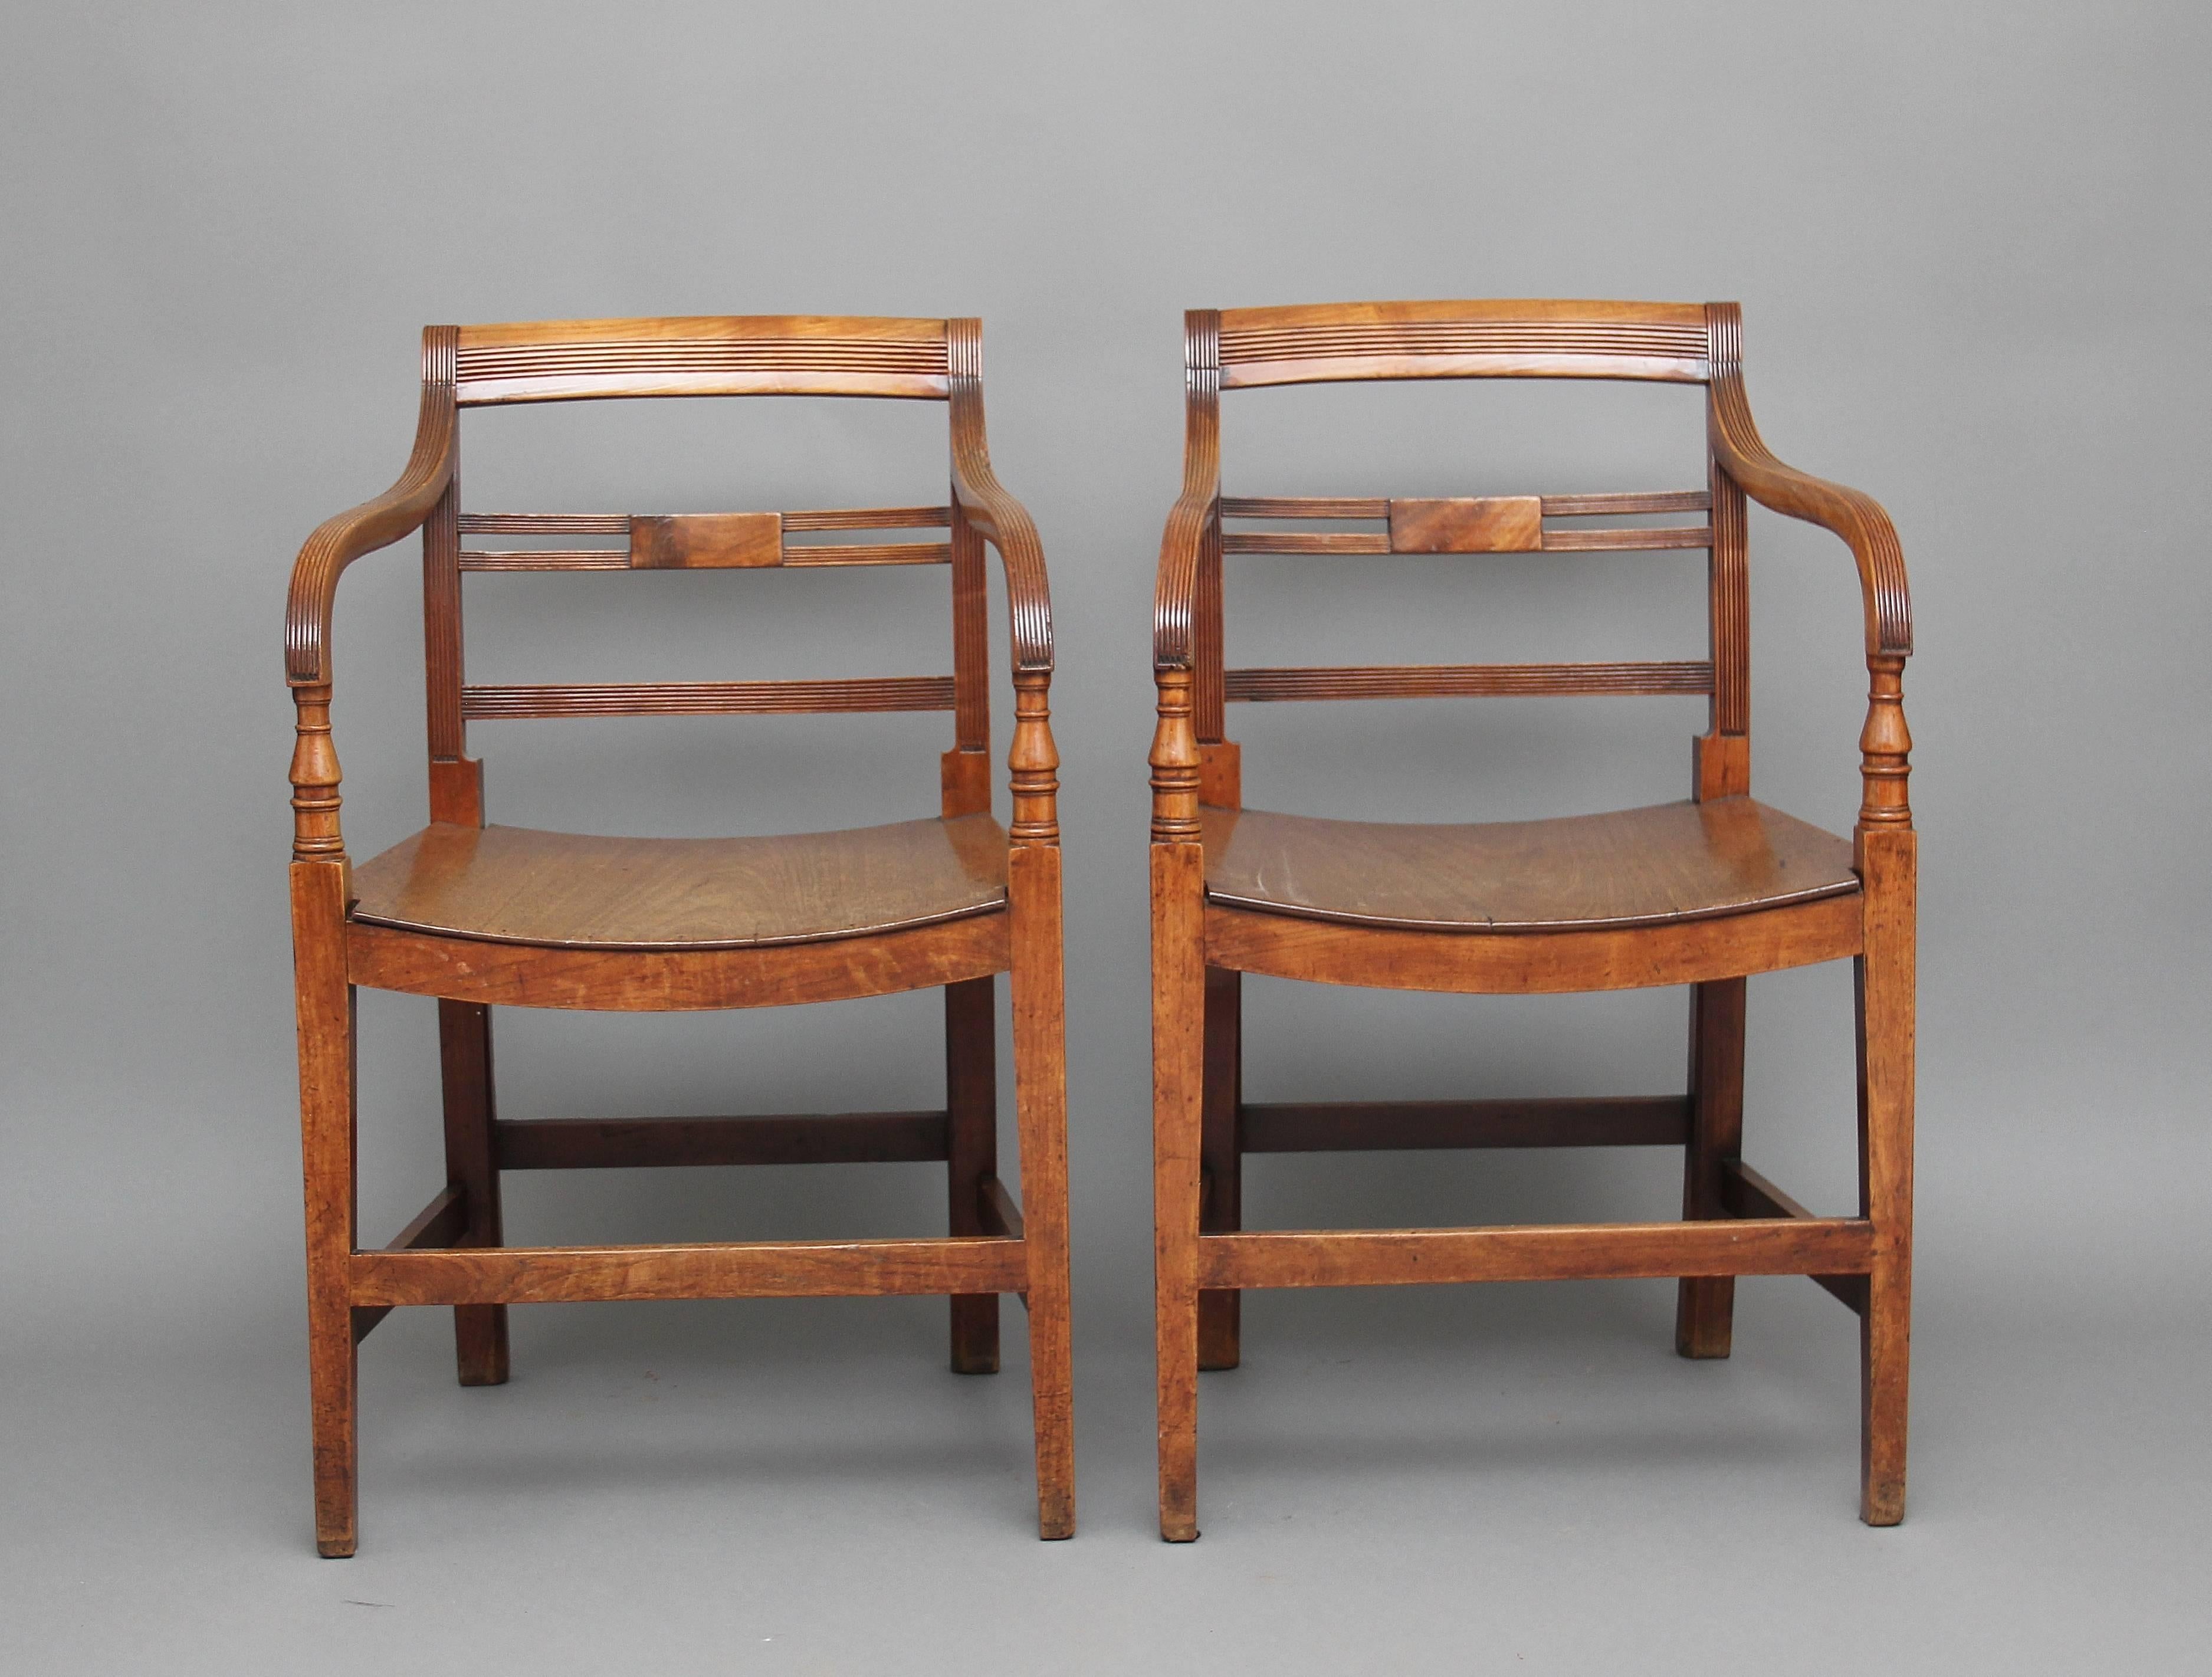 A pair of early 19th century fruitwood country open armchairs with a slightly arched hardwood seat, with three reeded back rails, shaped reeded arms with nice turned supports, on square legs supported with front, side and back stretchers, circa